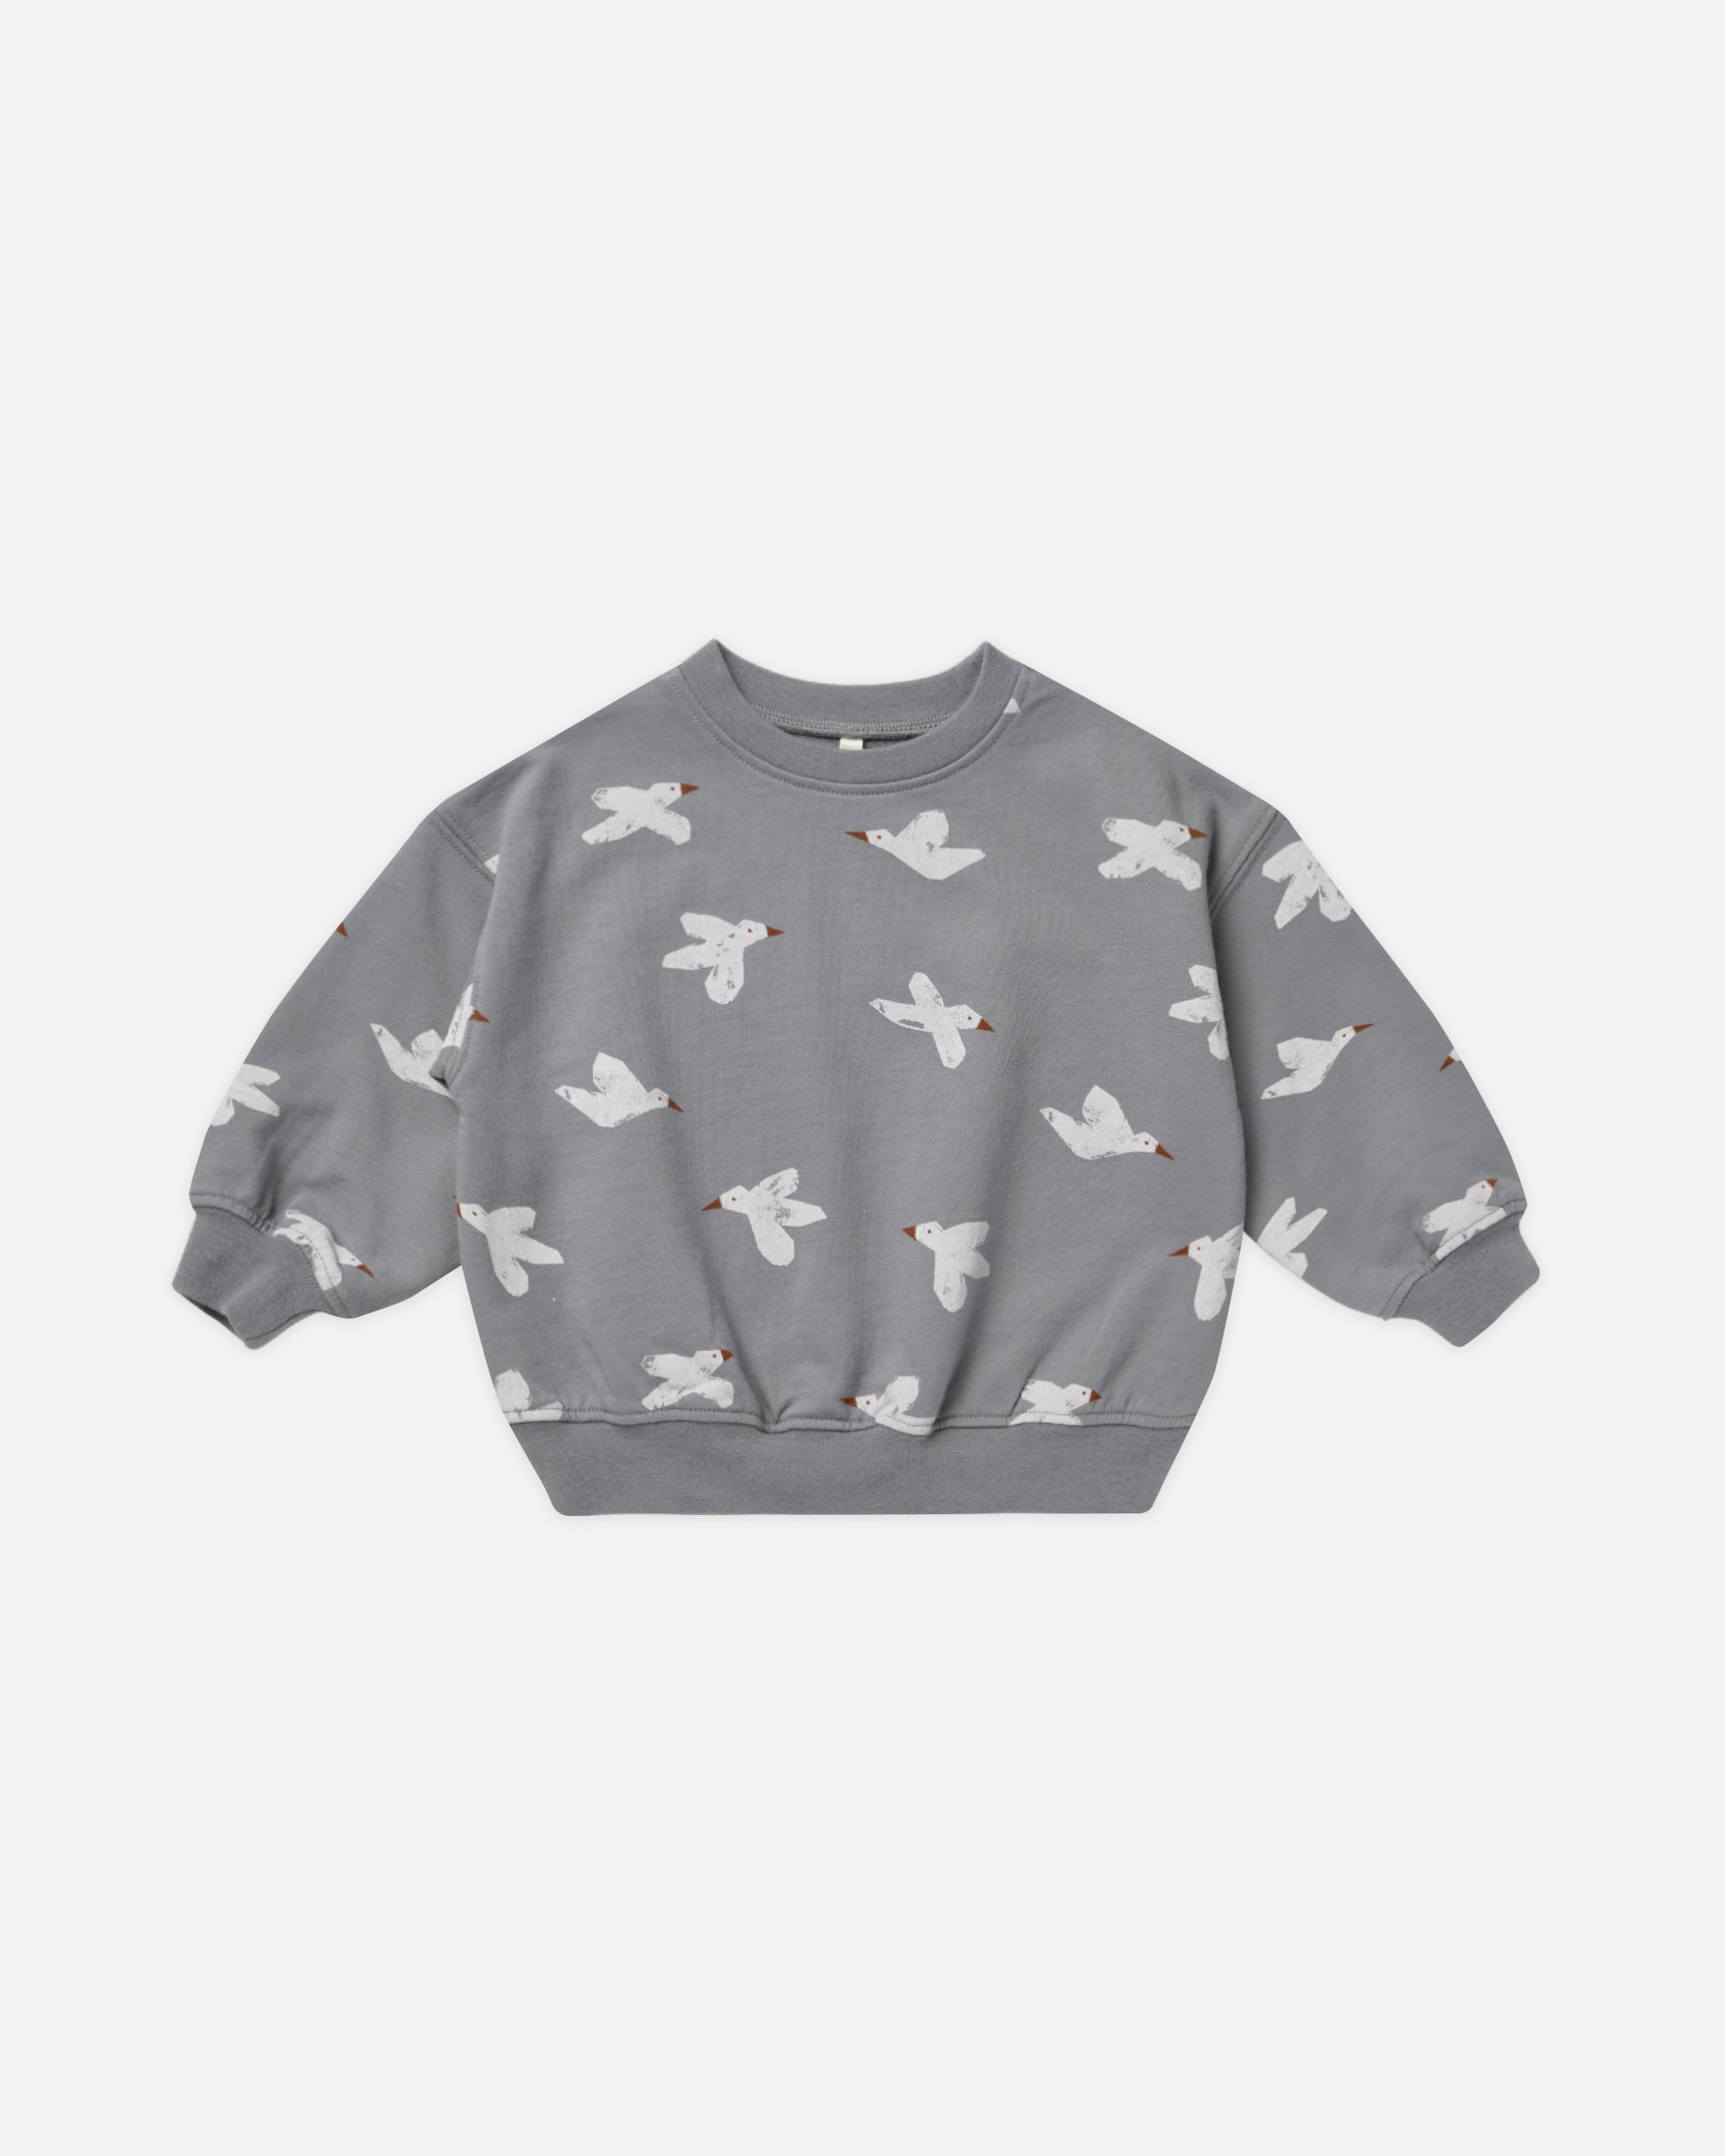 Relaxed Sweatshirt || Birds - Rylee + Cru | Kids Clothes | Trendy Baby Clothes | Modern Infant Outfits |